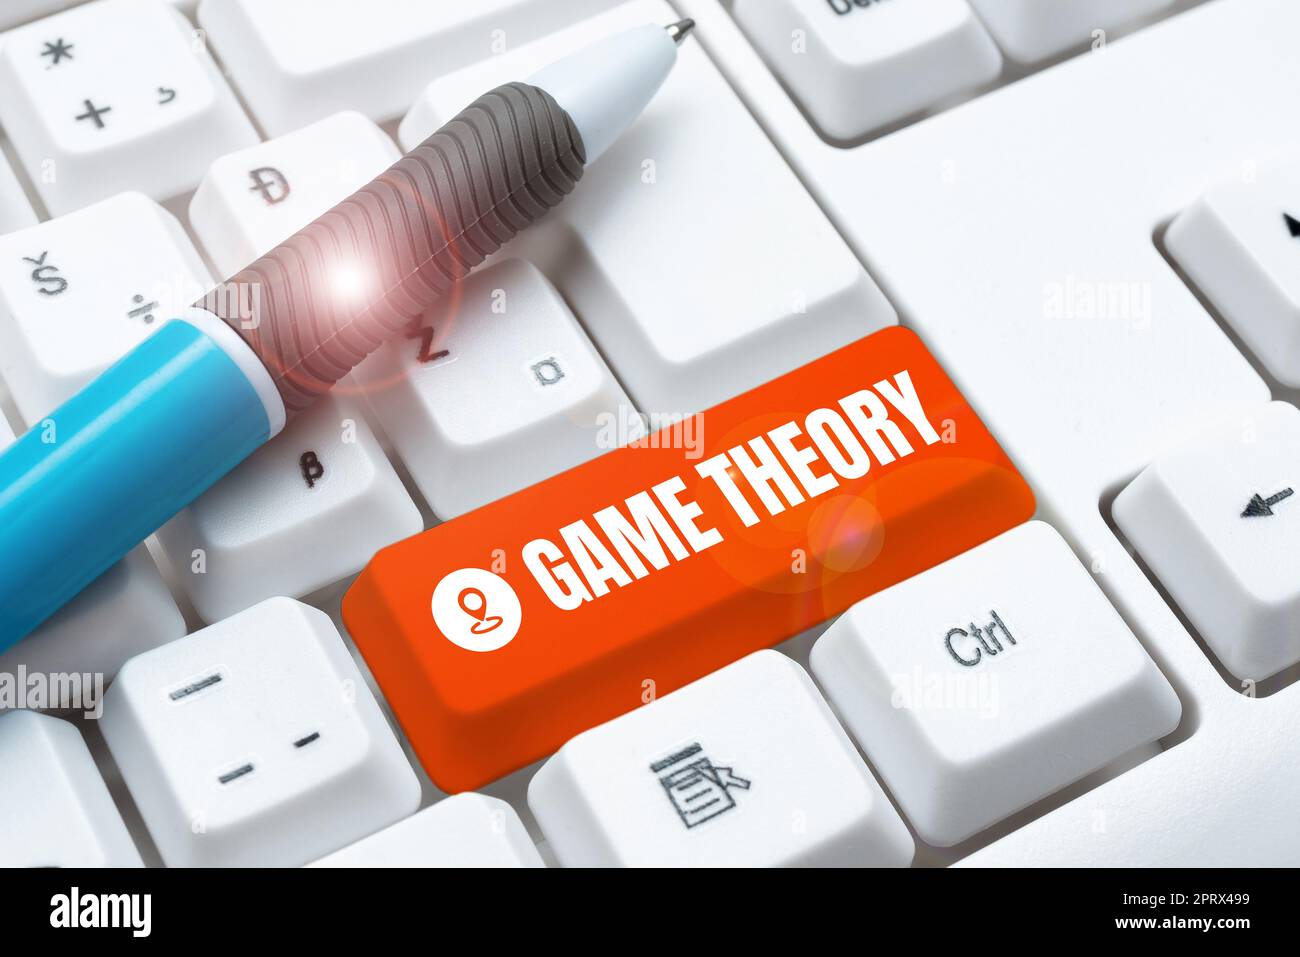 Writing displaying text Game Theory. Business idea branch of mathematics concerned with analysis of strategies Stock Photo